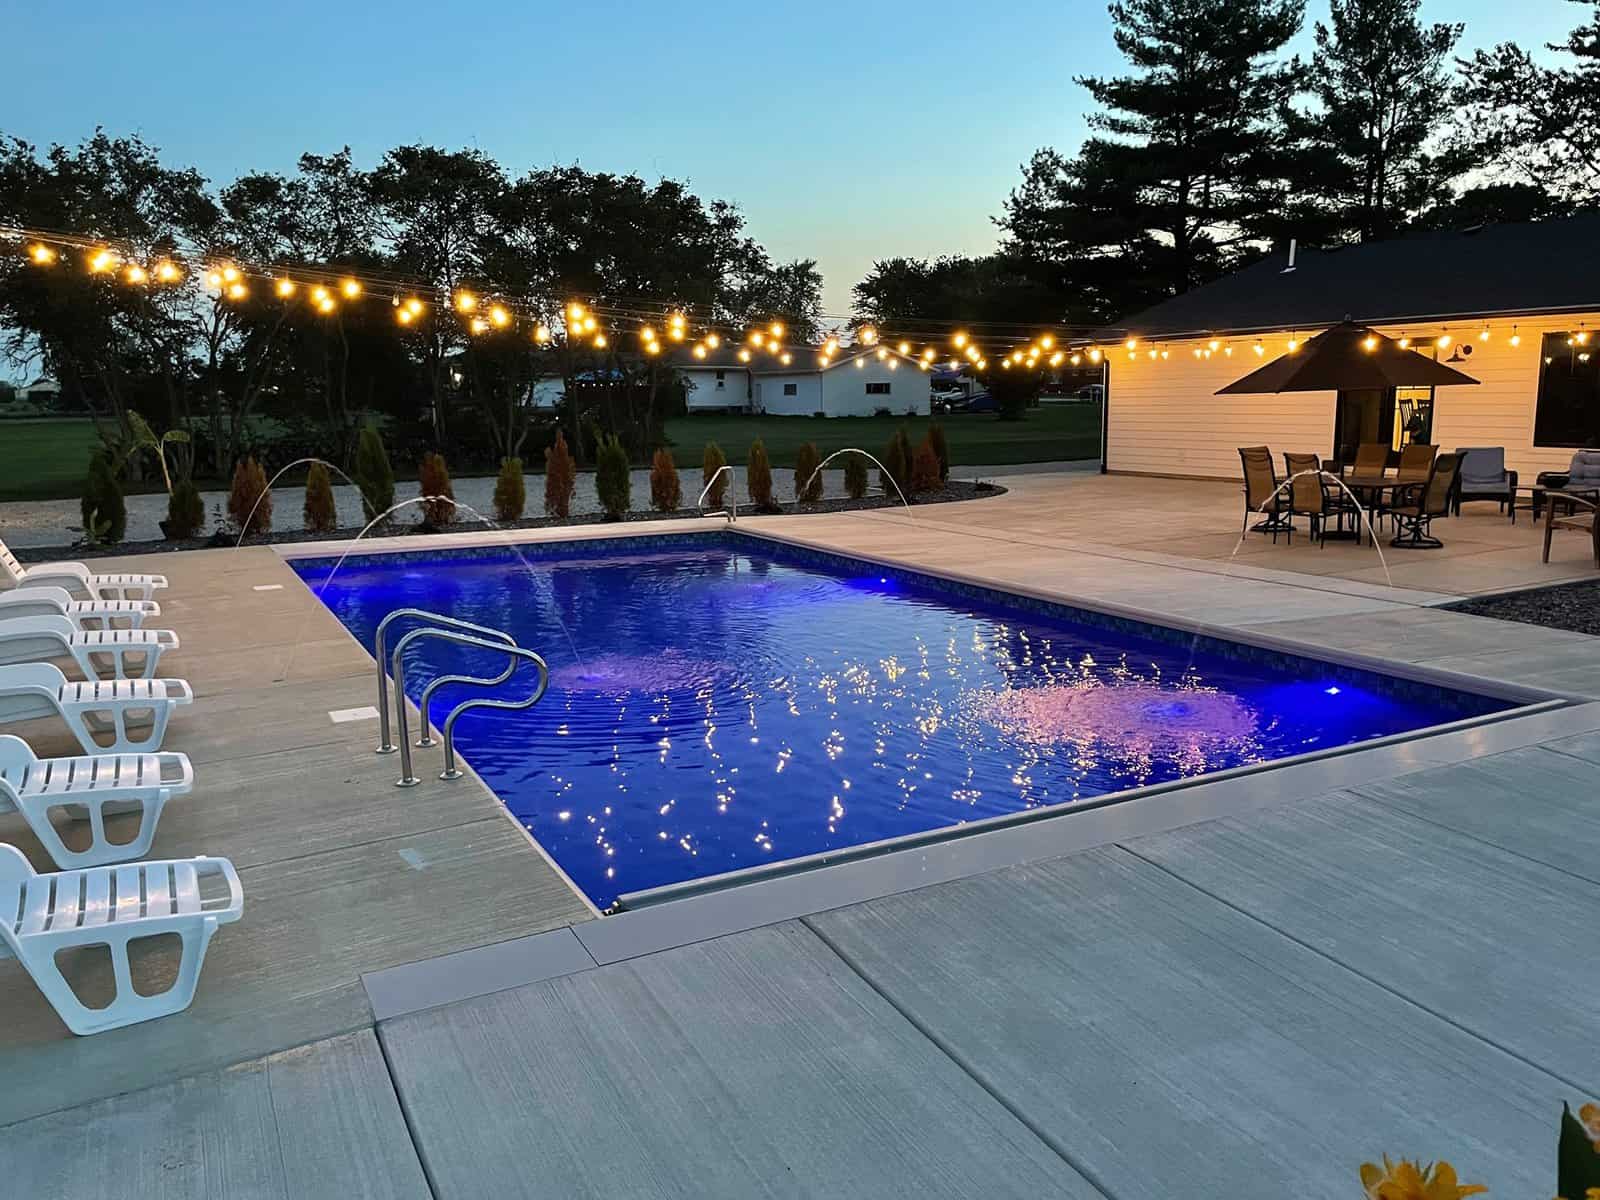 A pool with chairs and string lights at dusk.